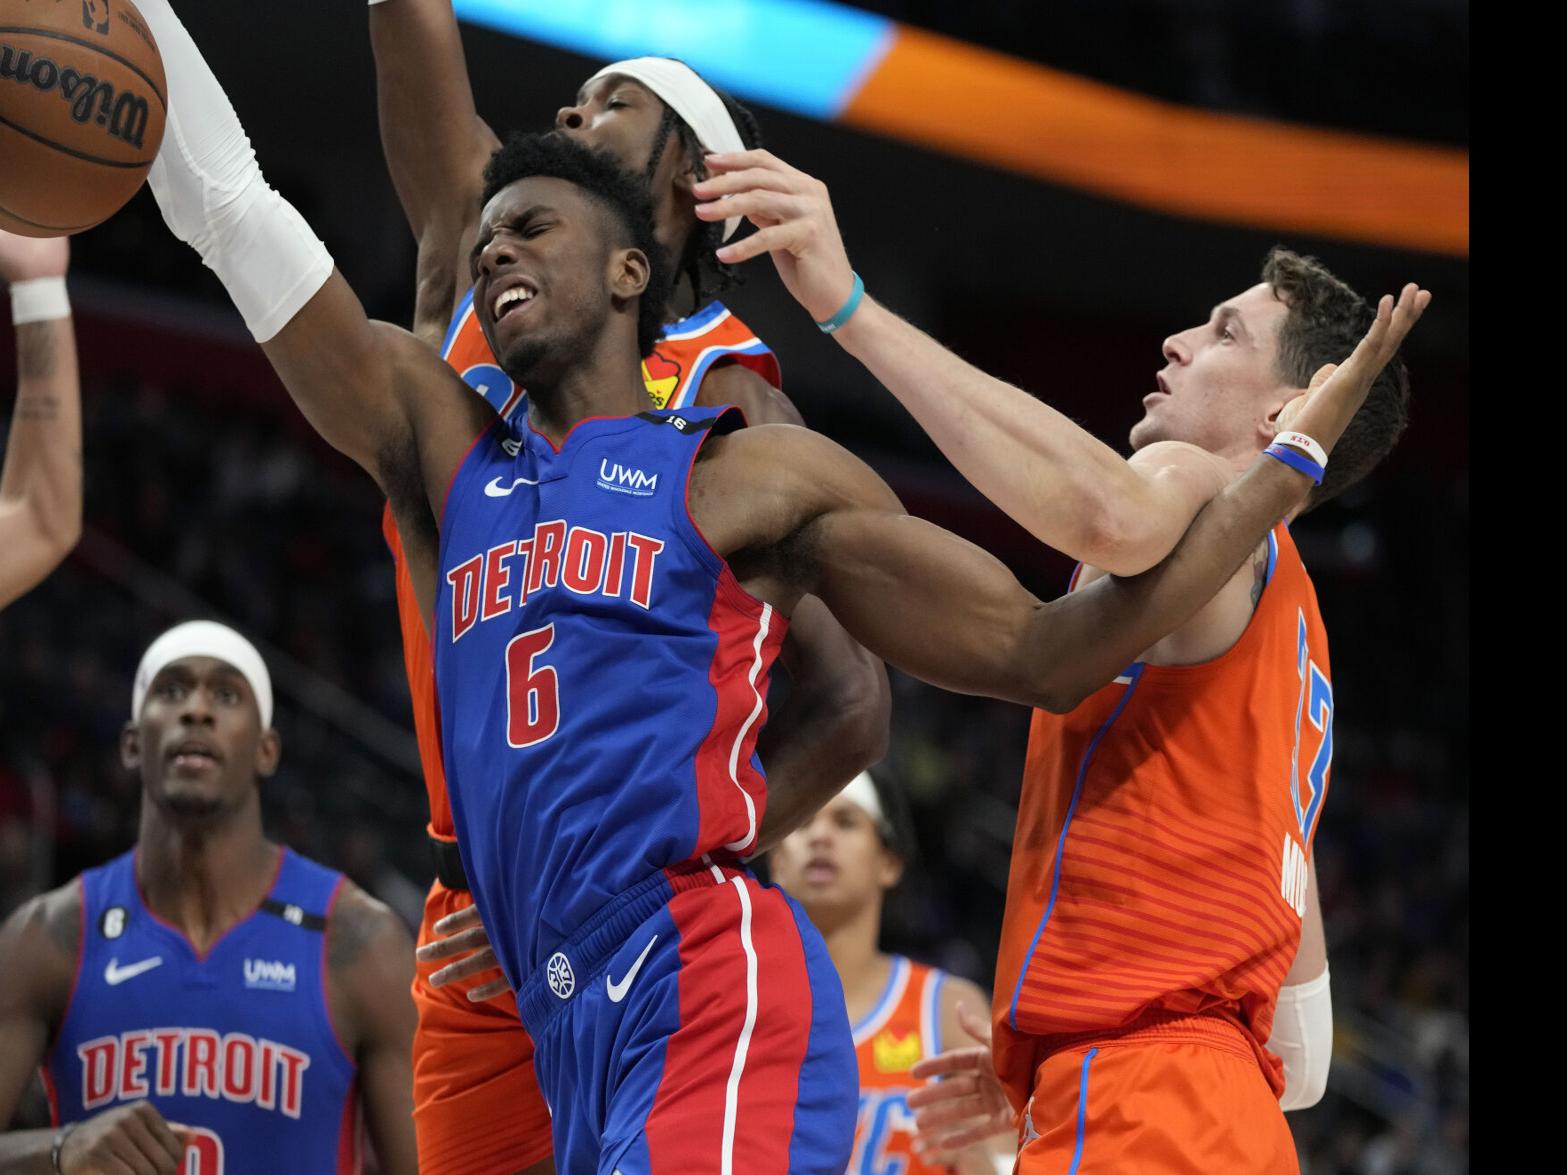 Detroit Pistons lose to Nuggets on Cade Cunningham's career night